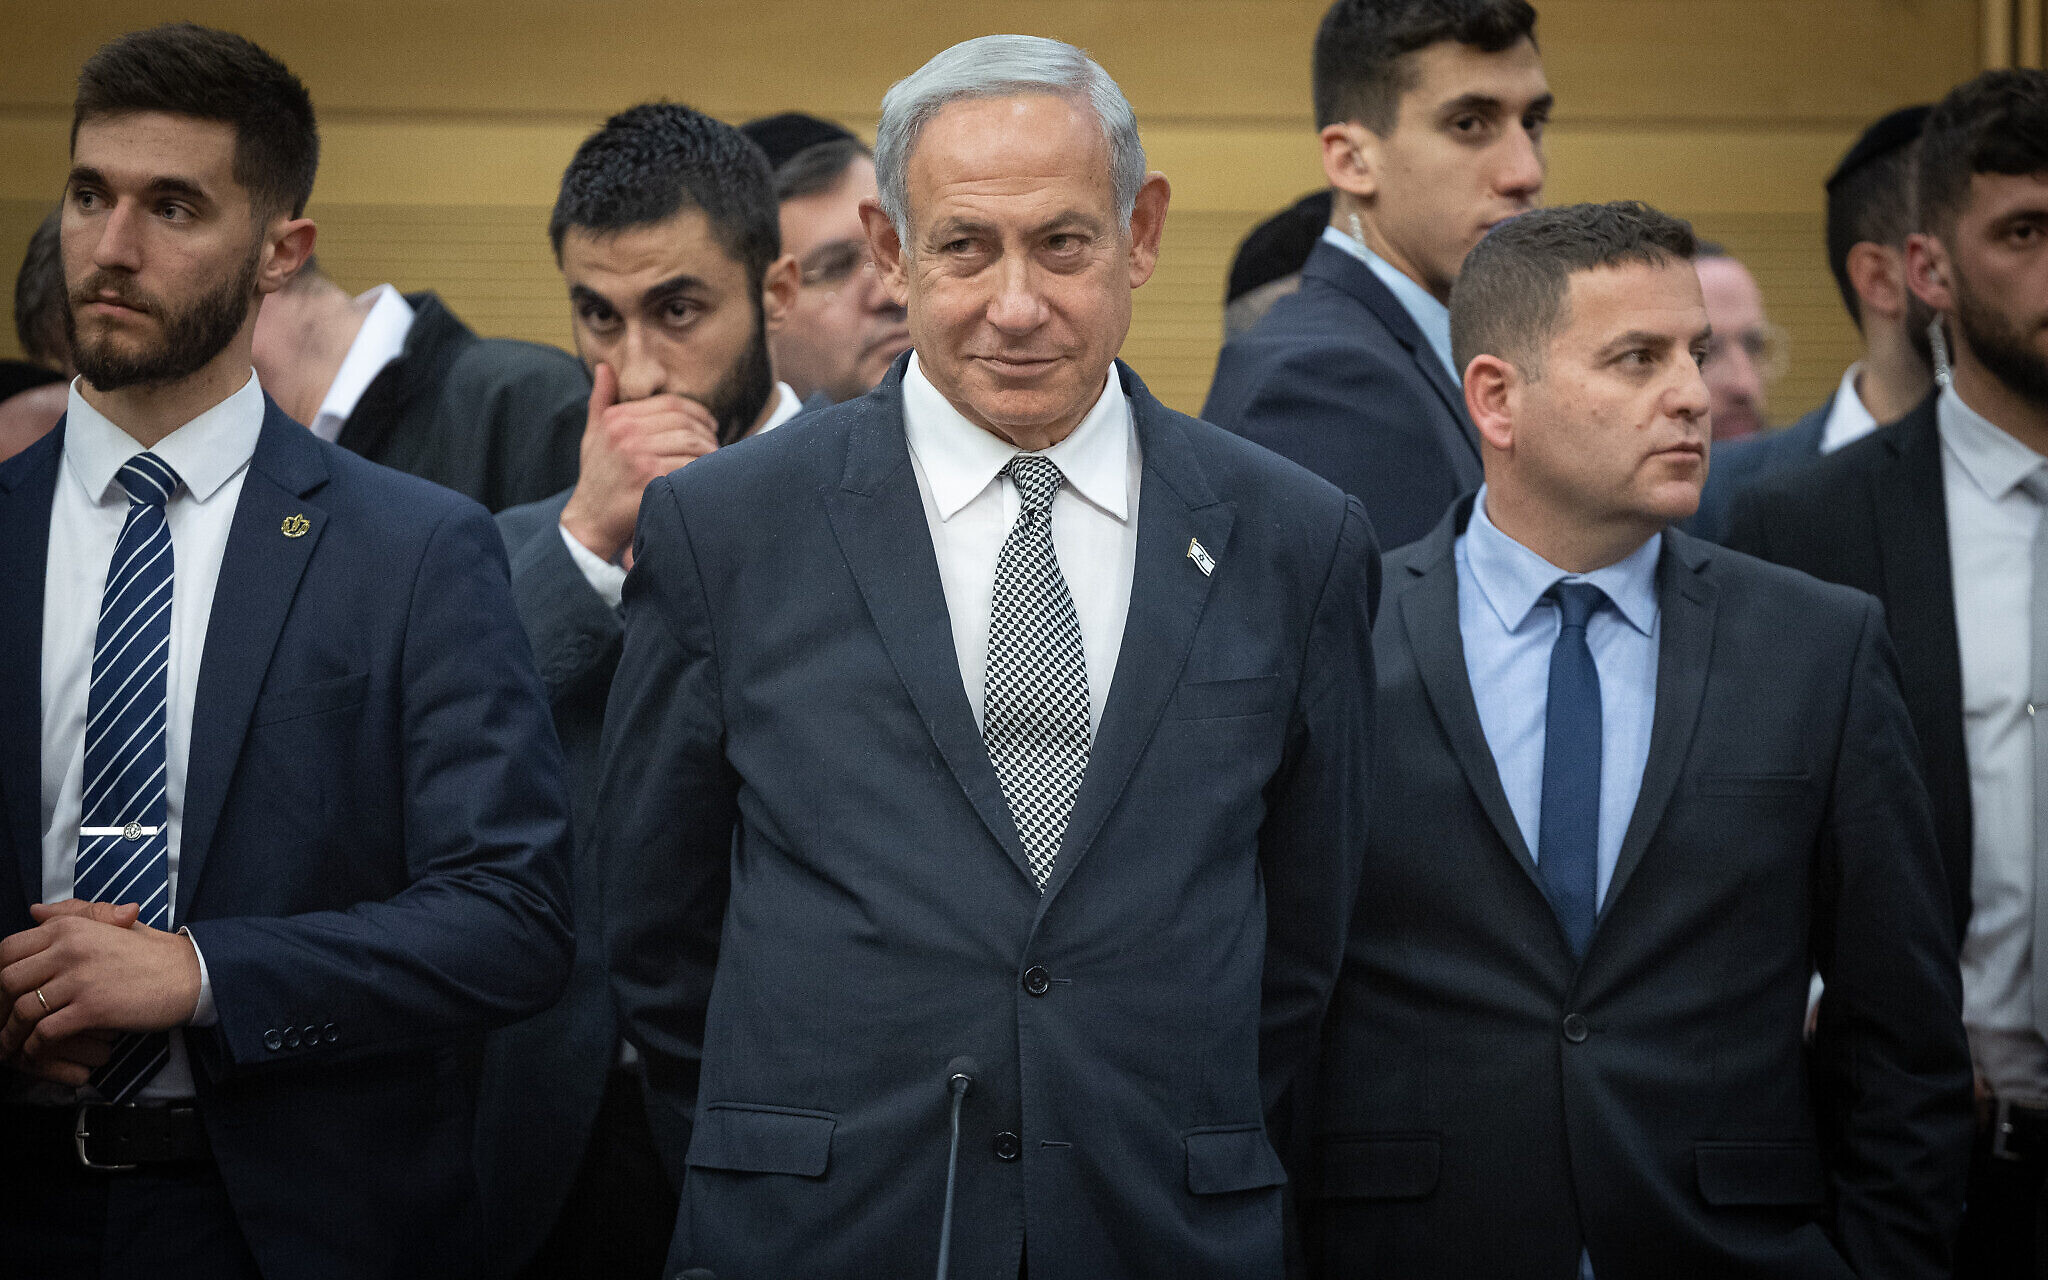 Netanyahu truly aims to be 'King Bibi' now. We must use all legal means